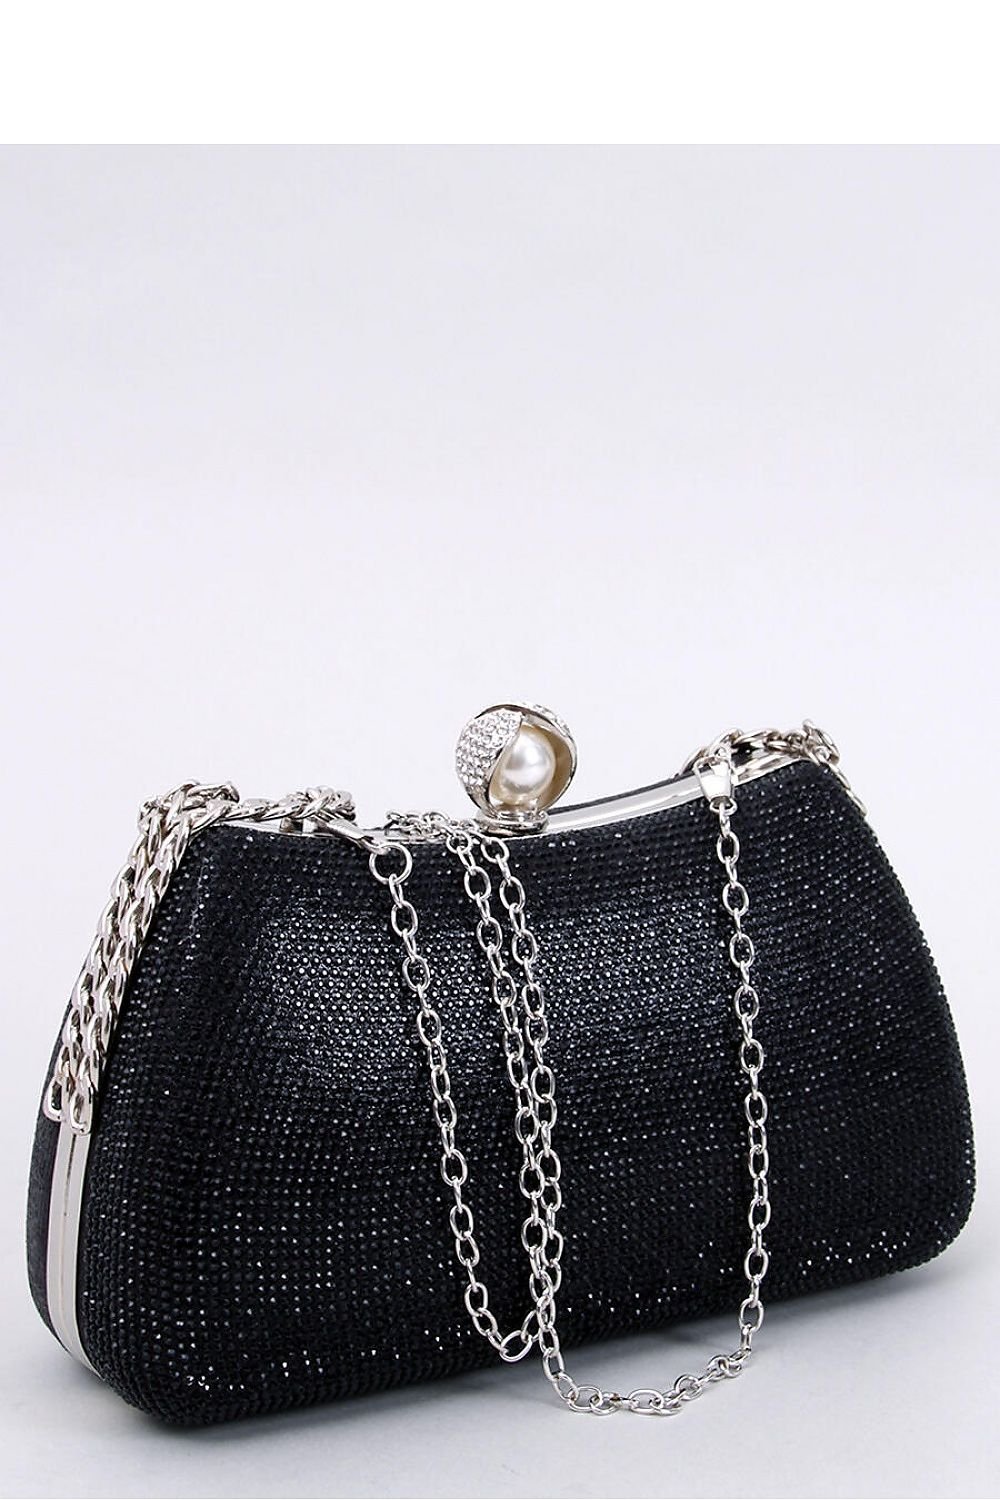 Envelope clutch bag - M&H FashionEnvelope clutch bagM&H FashionM&H Fashion189606_1103864one-size-fits-allEnvelope clutch bag InelloM&H FashionM&H FashionLadies formal handbag ? clutch bag with chain. It is fastened from the top with a striking clasp with pearl and stones. It can be worn in two ways ? in hand like a cEnvelope clutch bag